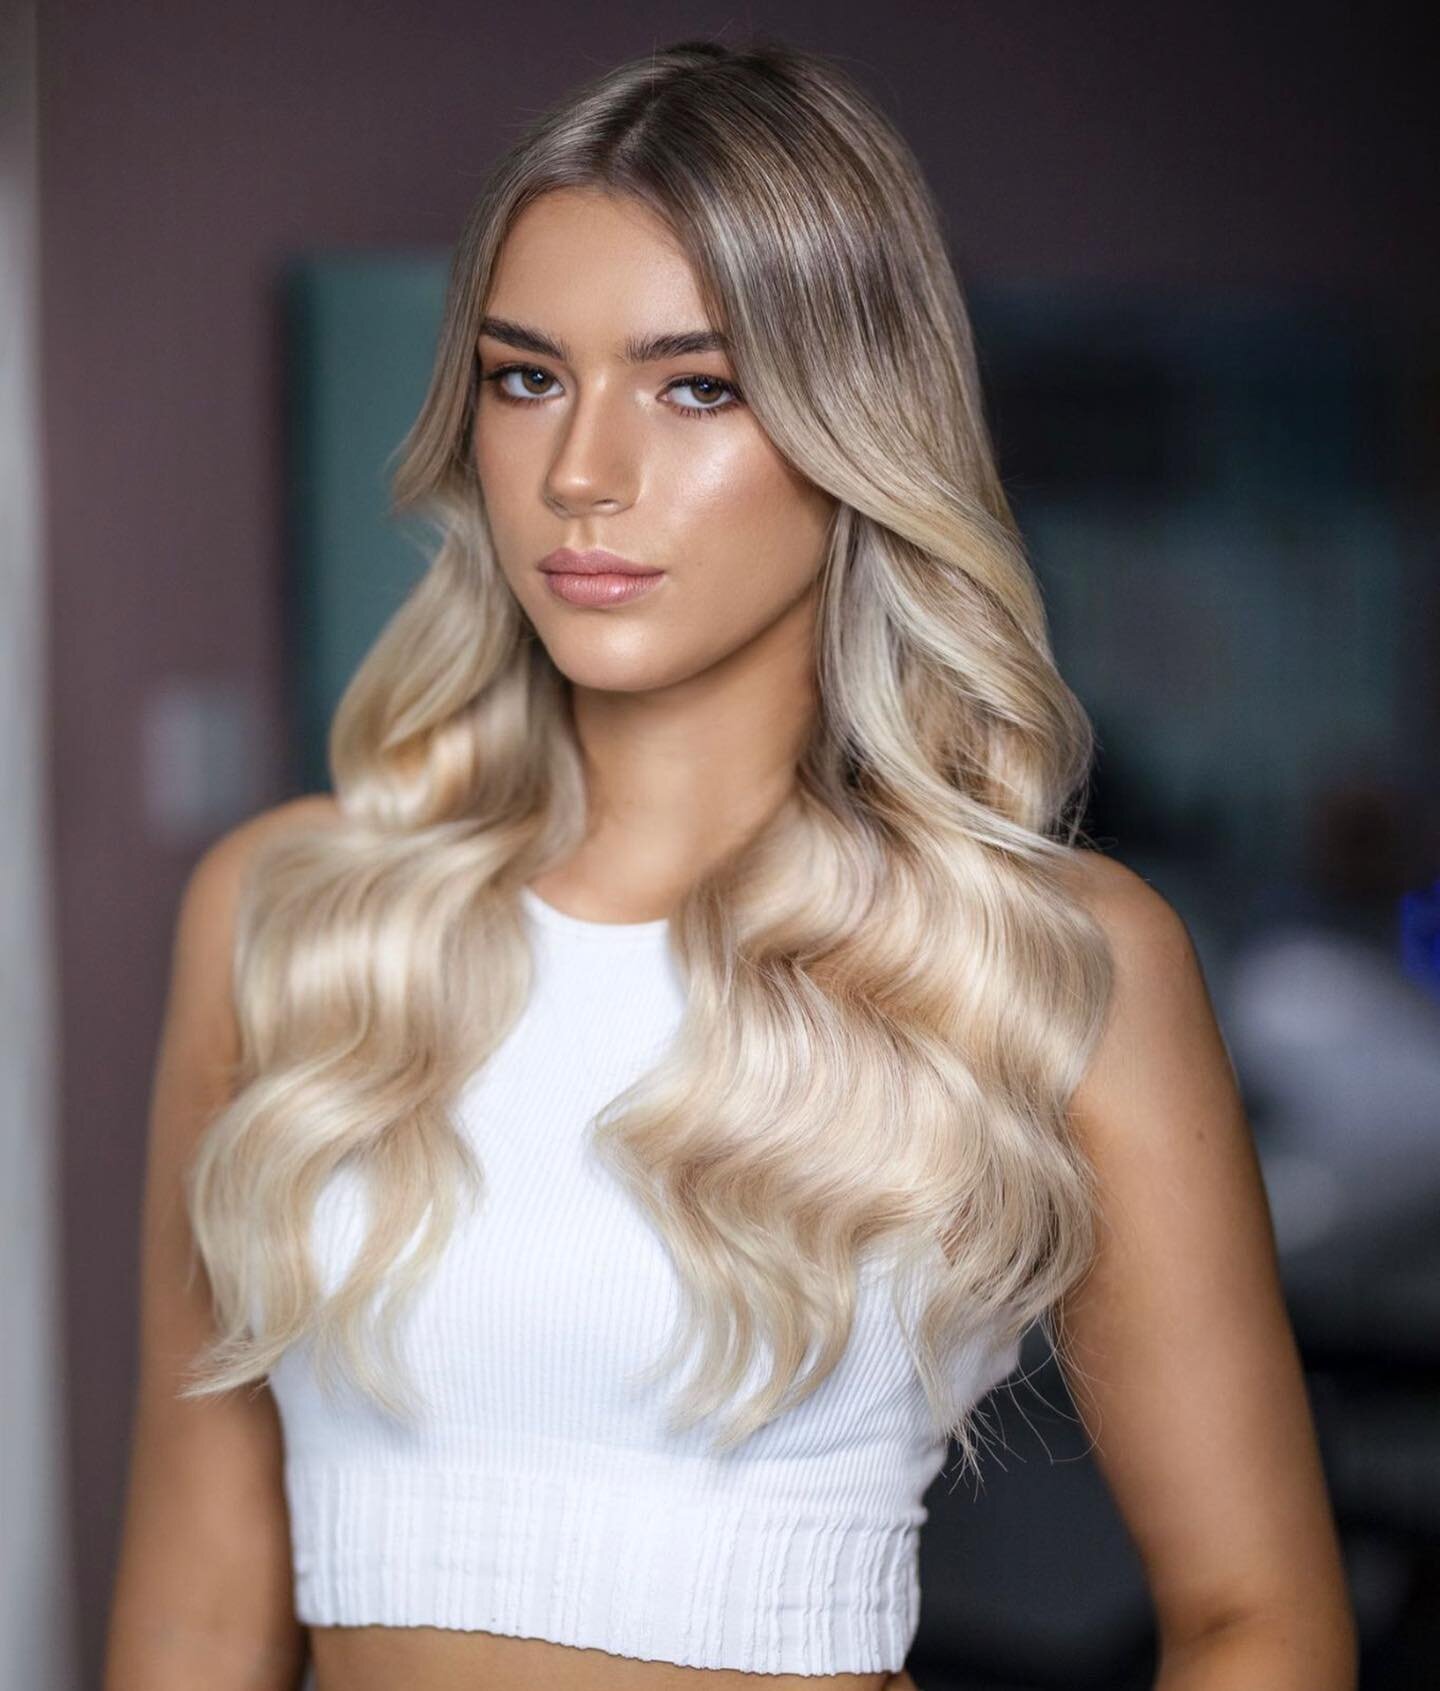 ZEN LUXURY EXTENSIONS ❤️ 

We are offering 20% off extensions for the month of November in our Grand Canal and Merrion Row salons ❤️ 

Book in for a free consultation via the link in bio ✨

@bozena_sarek_hairdressing 
📍Merrion Row 
📍Grand Canal